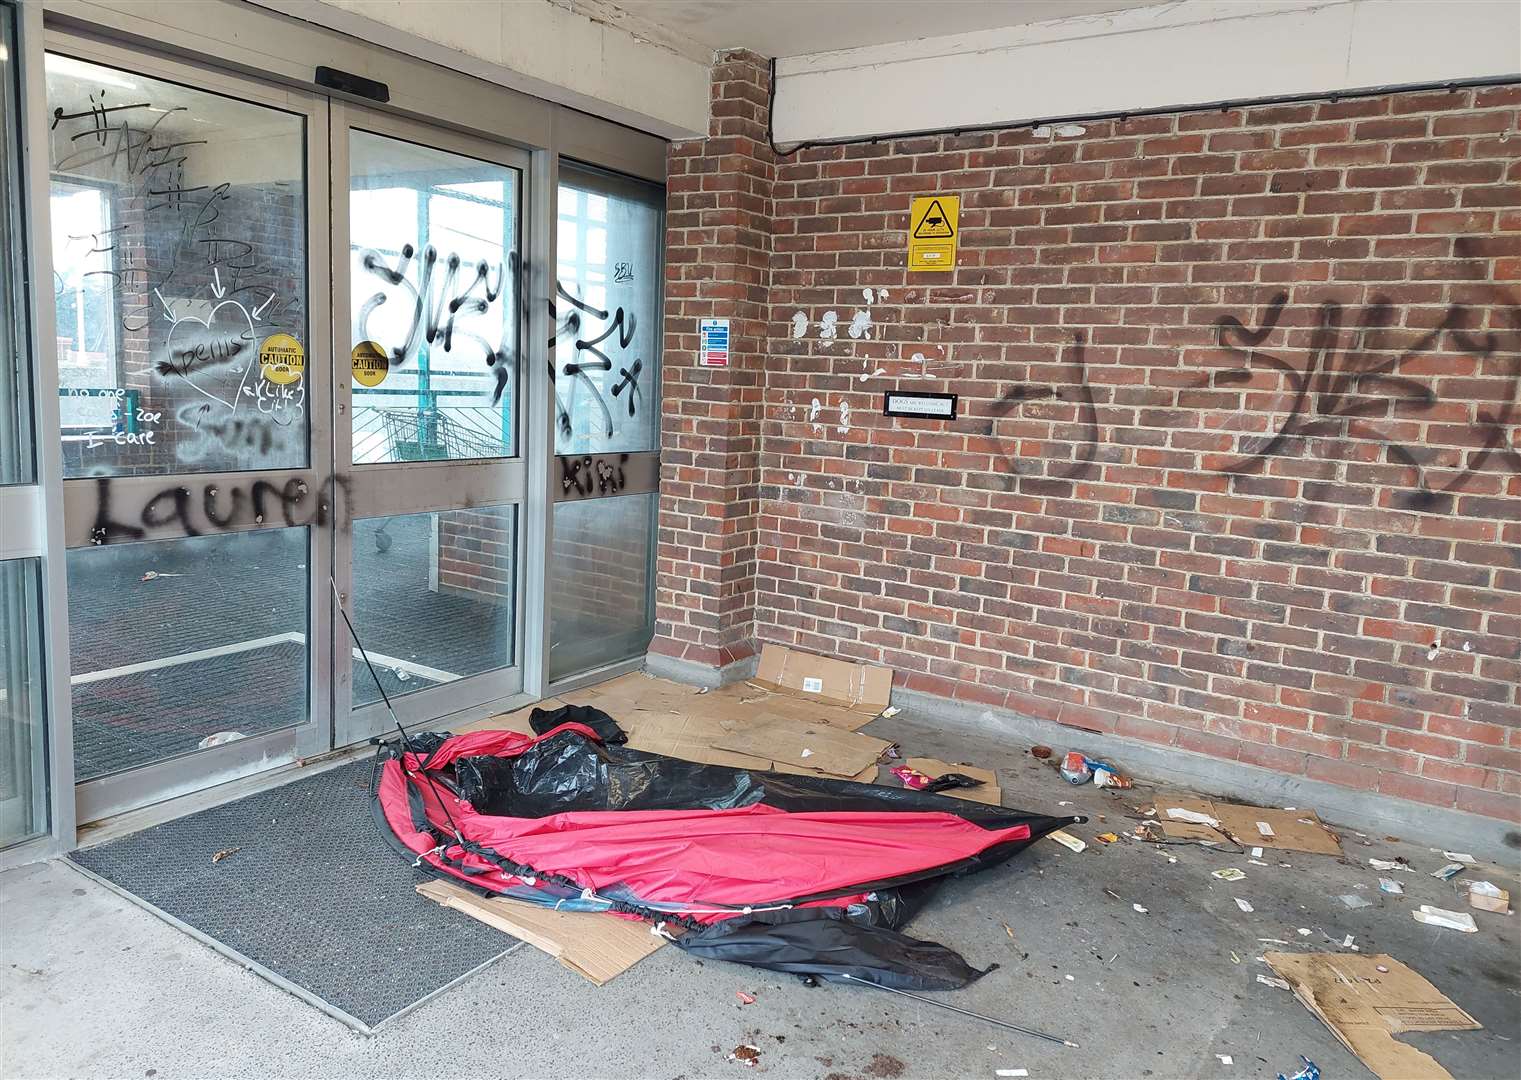 Vandals damaged the top floor of Park Mall car park